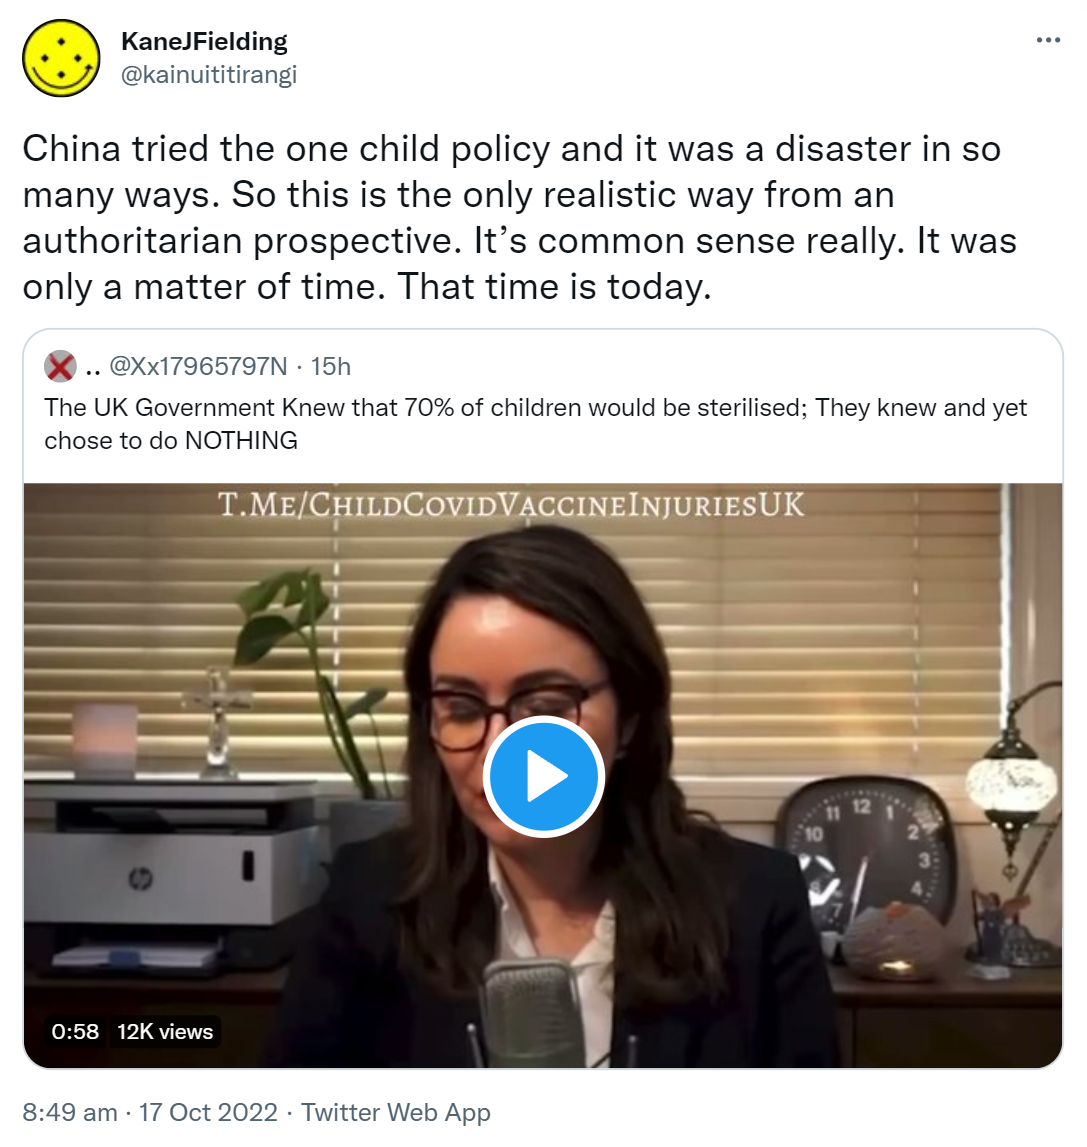 China tried the one child policy and it was a disaster in so many ways. So this is the only realistic way from an authoritarian prospective. It’s common sense really. It was only a matter of time. That time is today. Quote Tweet. @Xx17965797N. The UK Government Knew that 70% of children would be sterilised; They knew and yet chose to do NOTHING. 8:49 am · 17 Oct 2022.